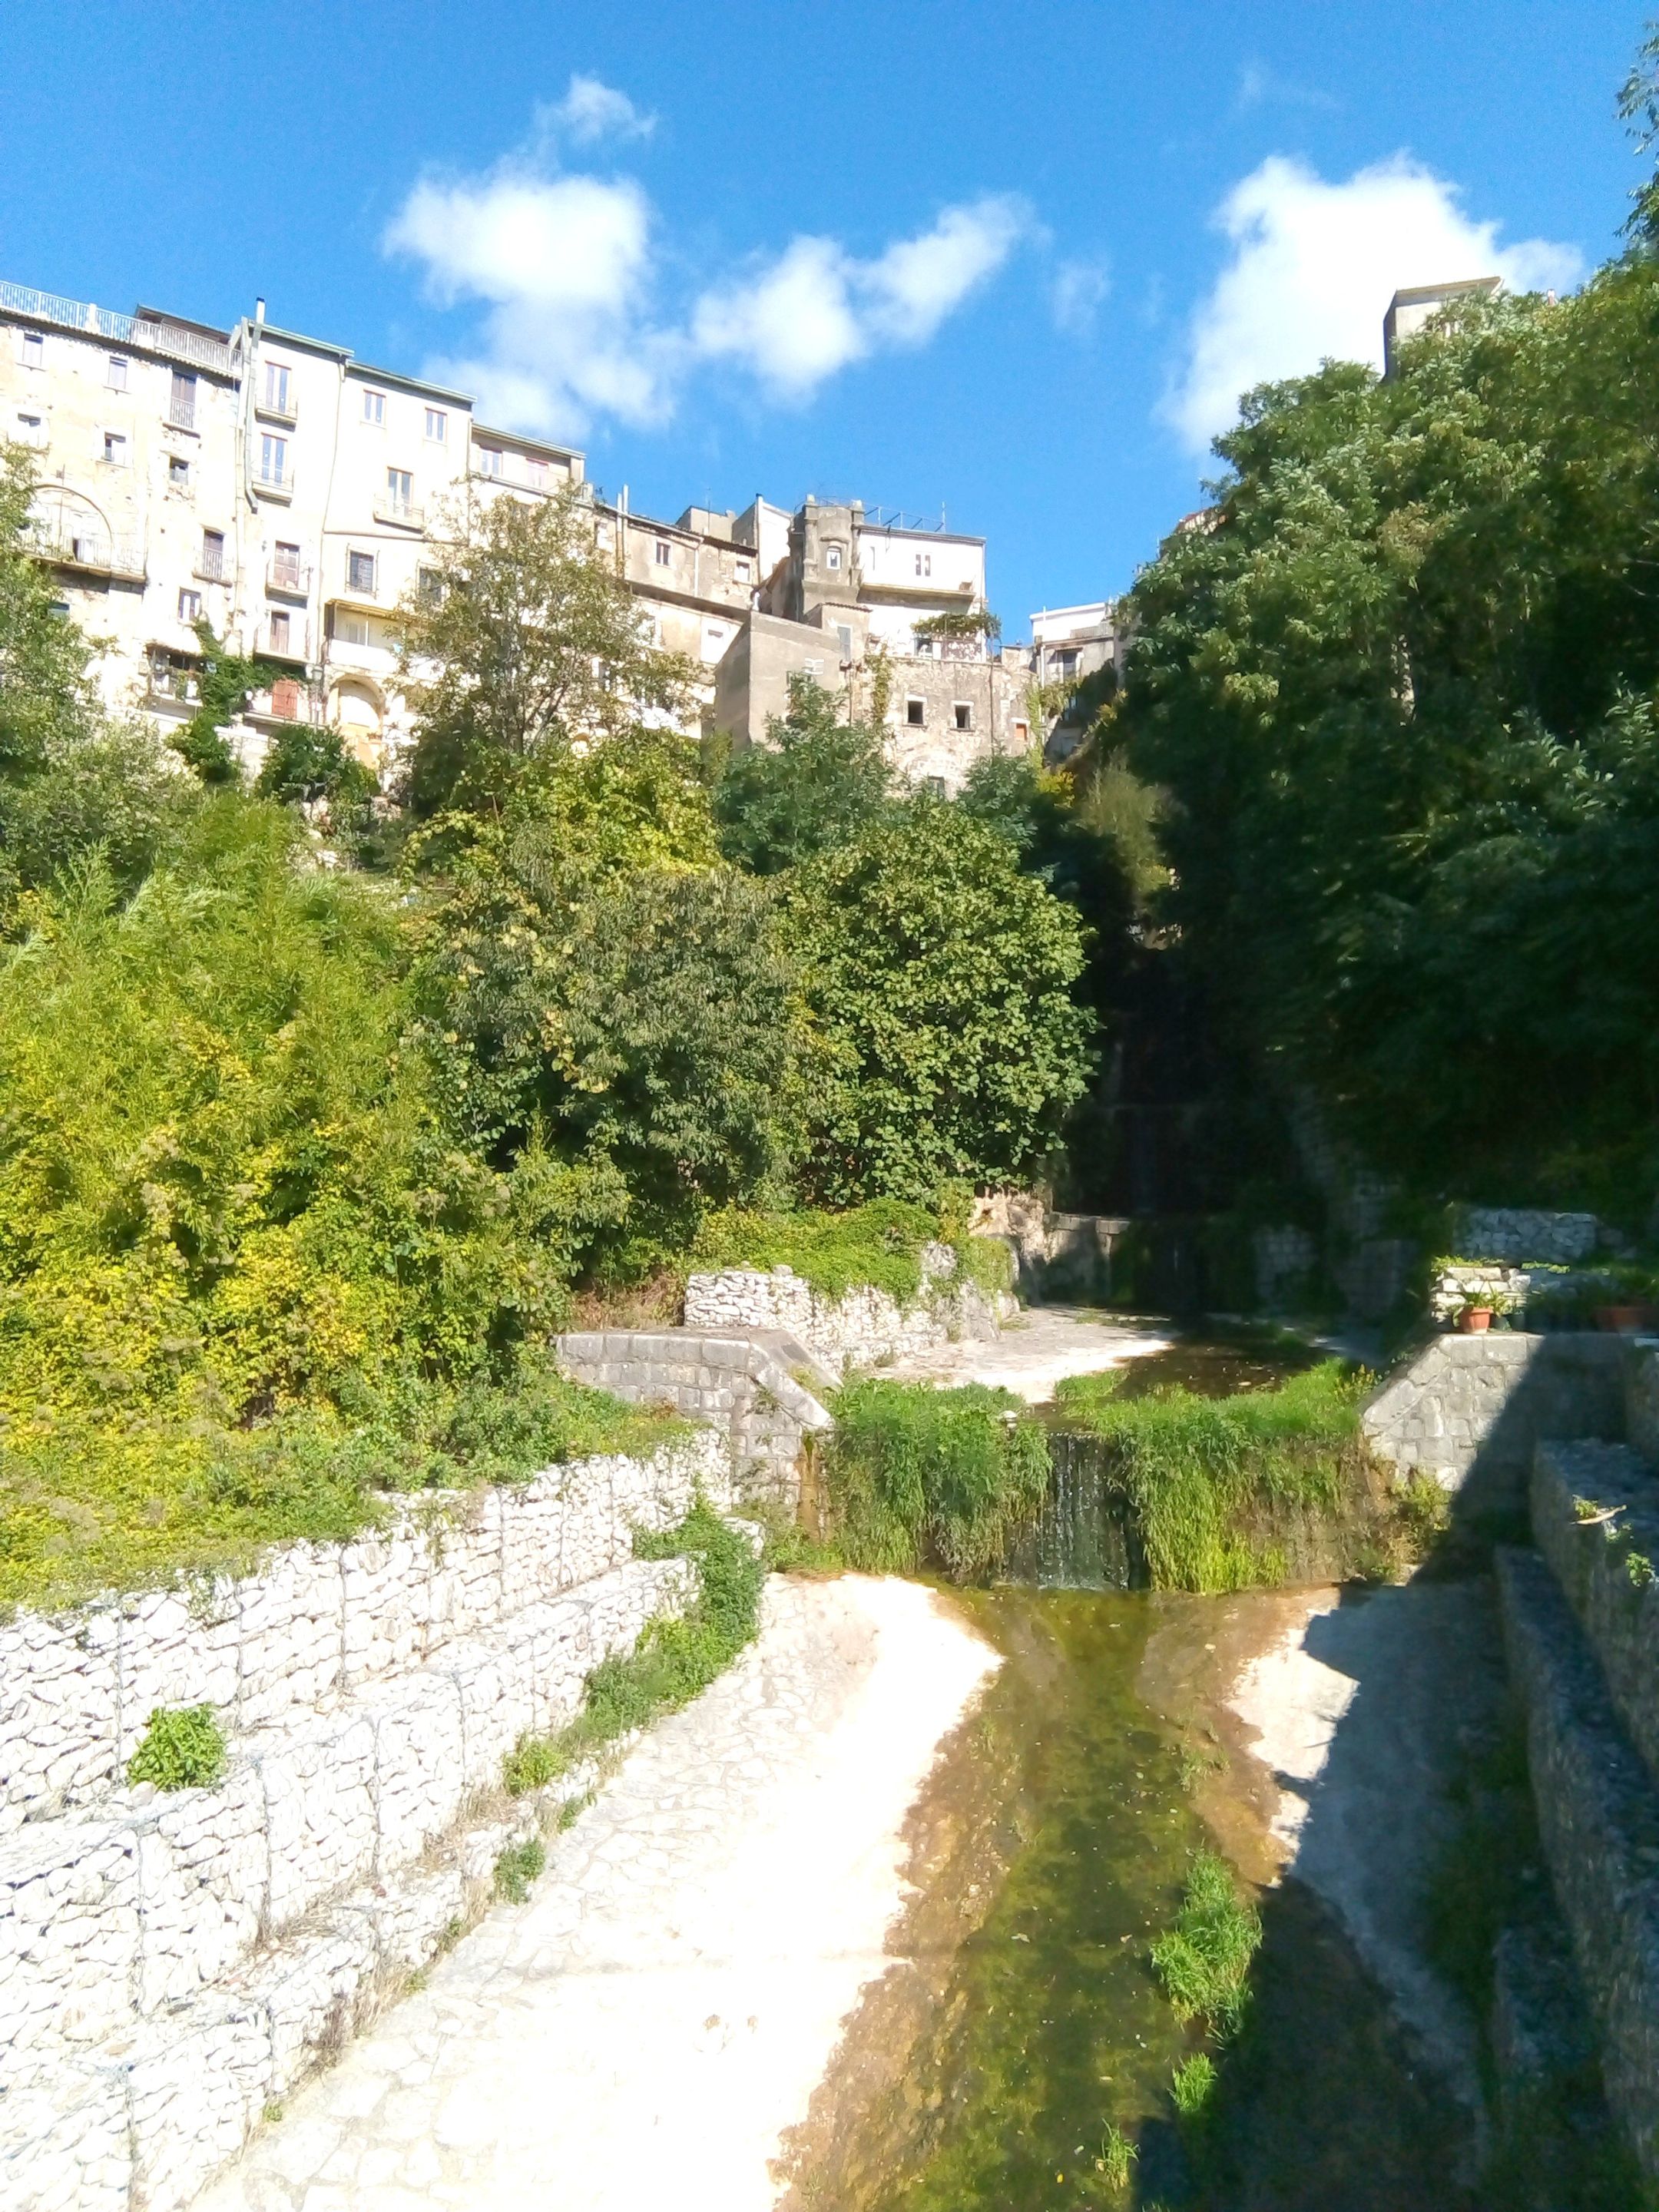 35 looking up towards the lower street - waterfall and greenery.jpg